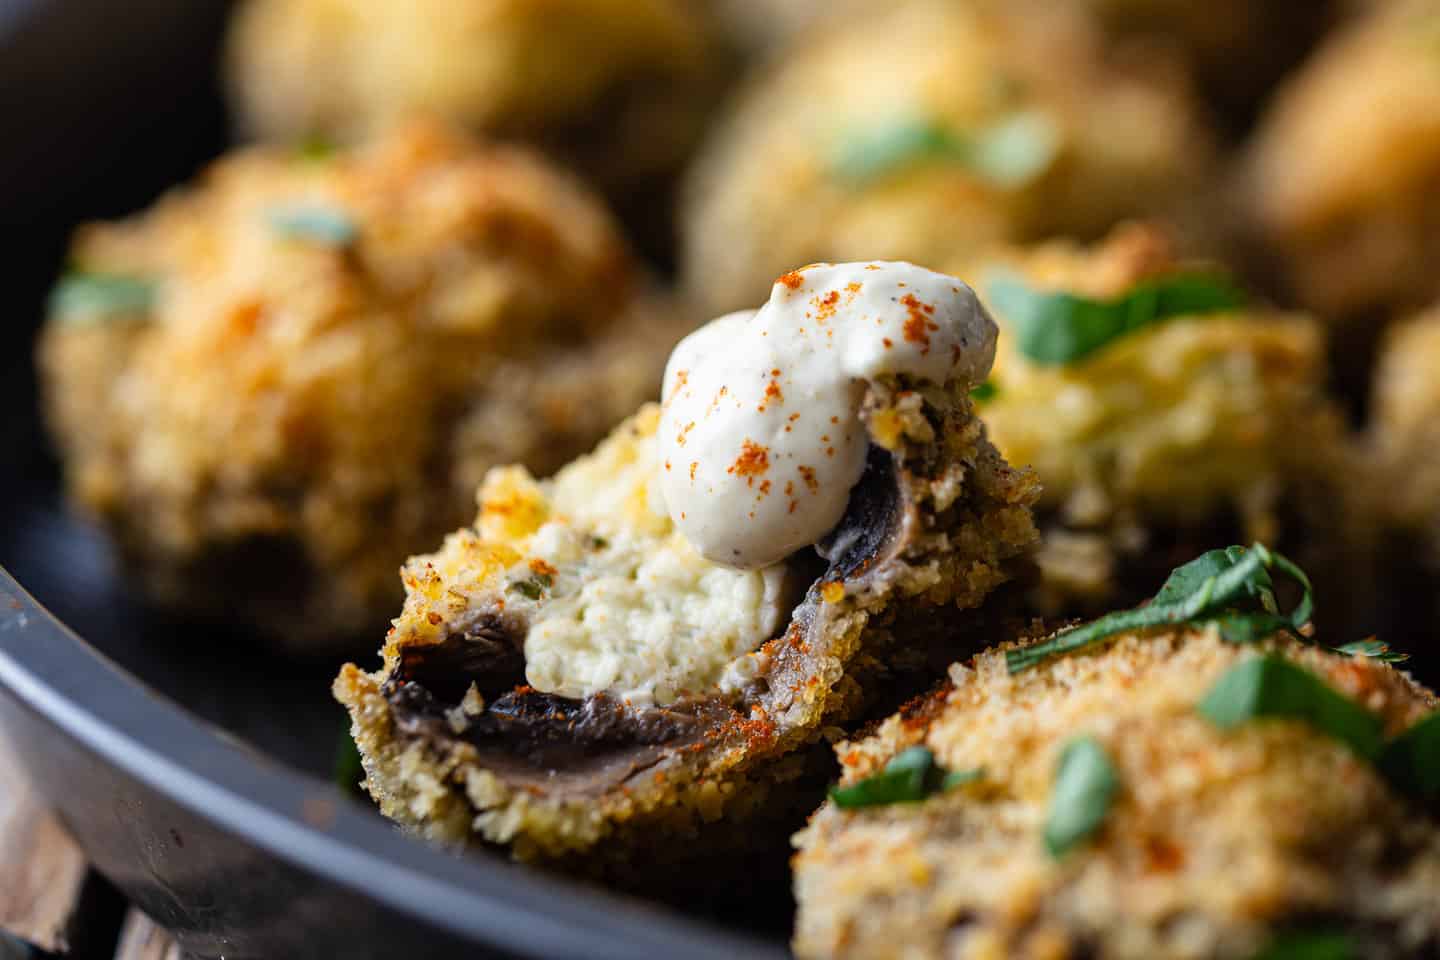 Cream cheese stuffed mushrooms, presented in a vintage cake pan with fresh herbs for garnish.